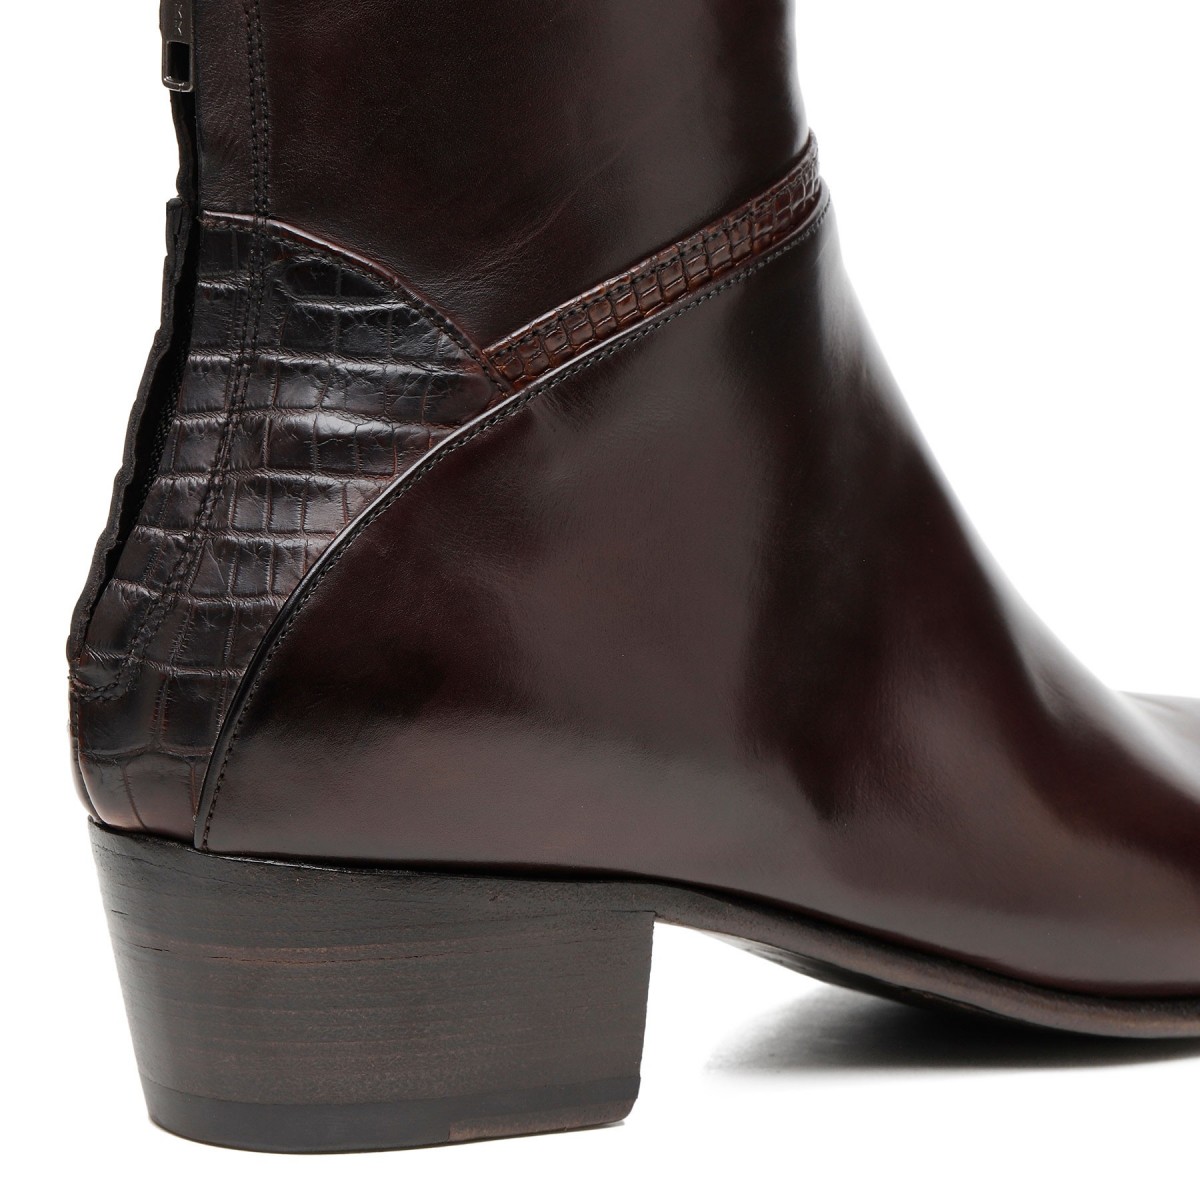 Brown calf leather ankle boots